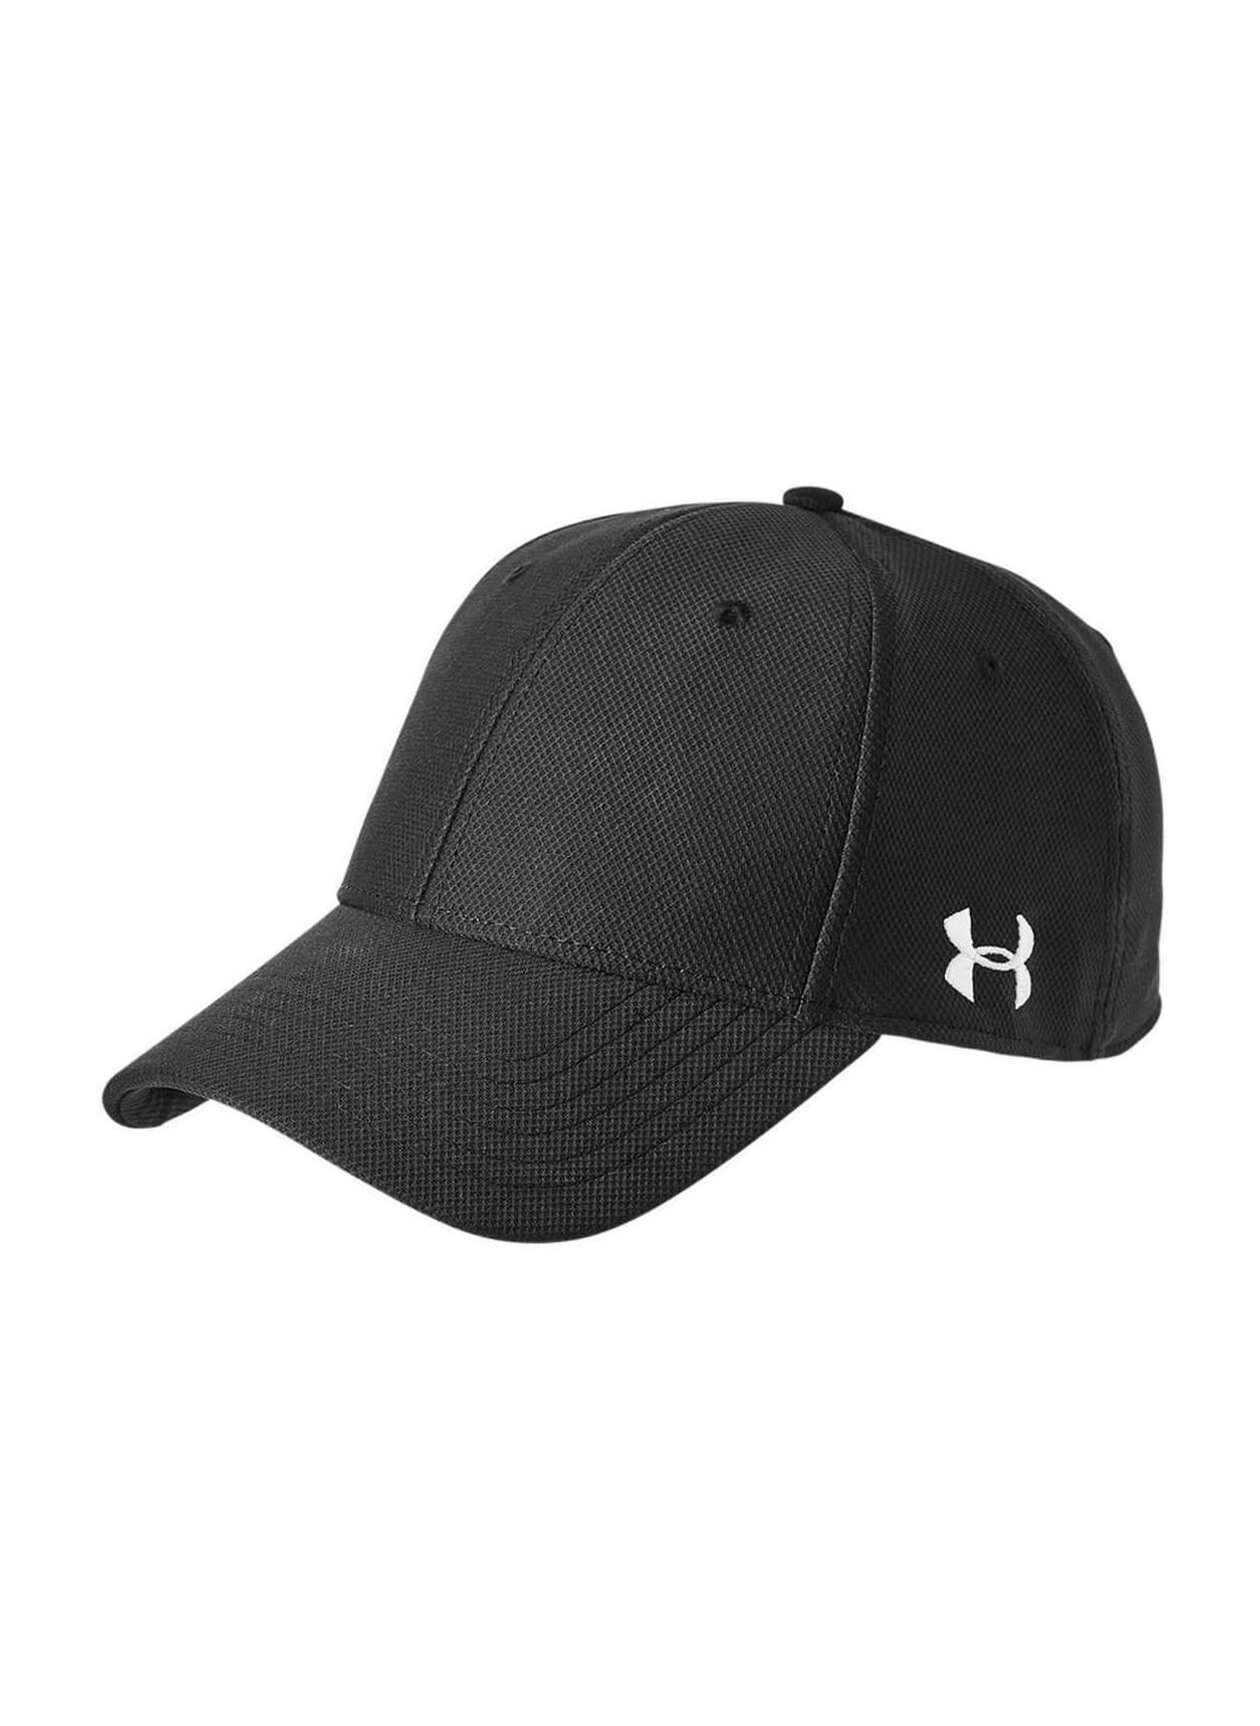 Under Under Hat Armour Custom Hats Armour Logo Curved | Blitzing